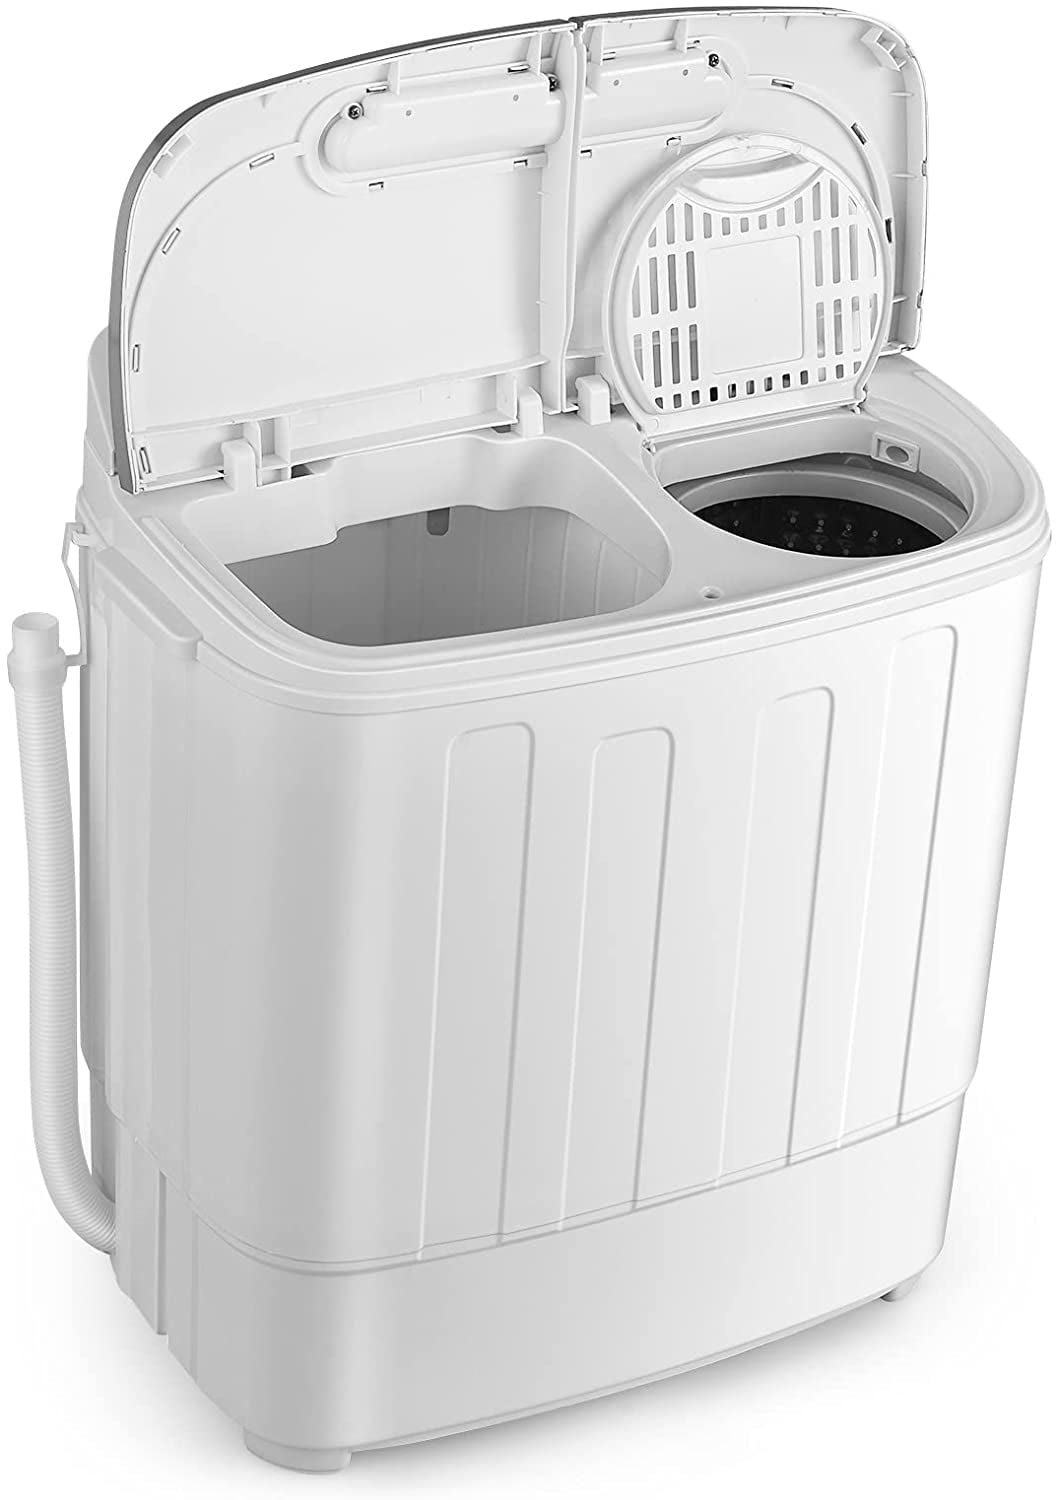 XPB36 Panda Portable Compact Washing Machine with Spinner Dryer Combo Twin  Tub for my RV, Off Grid 